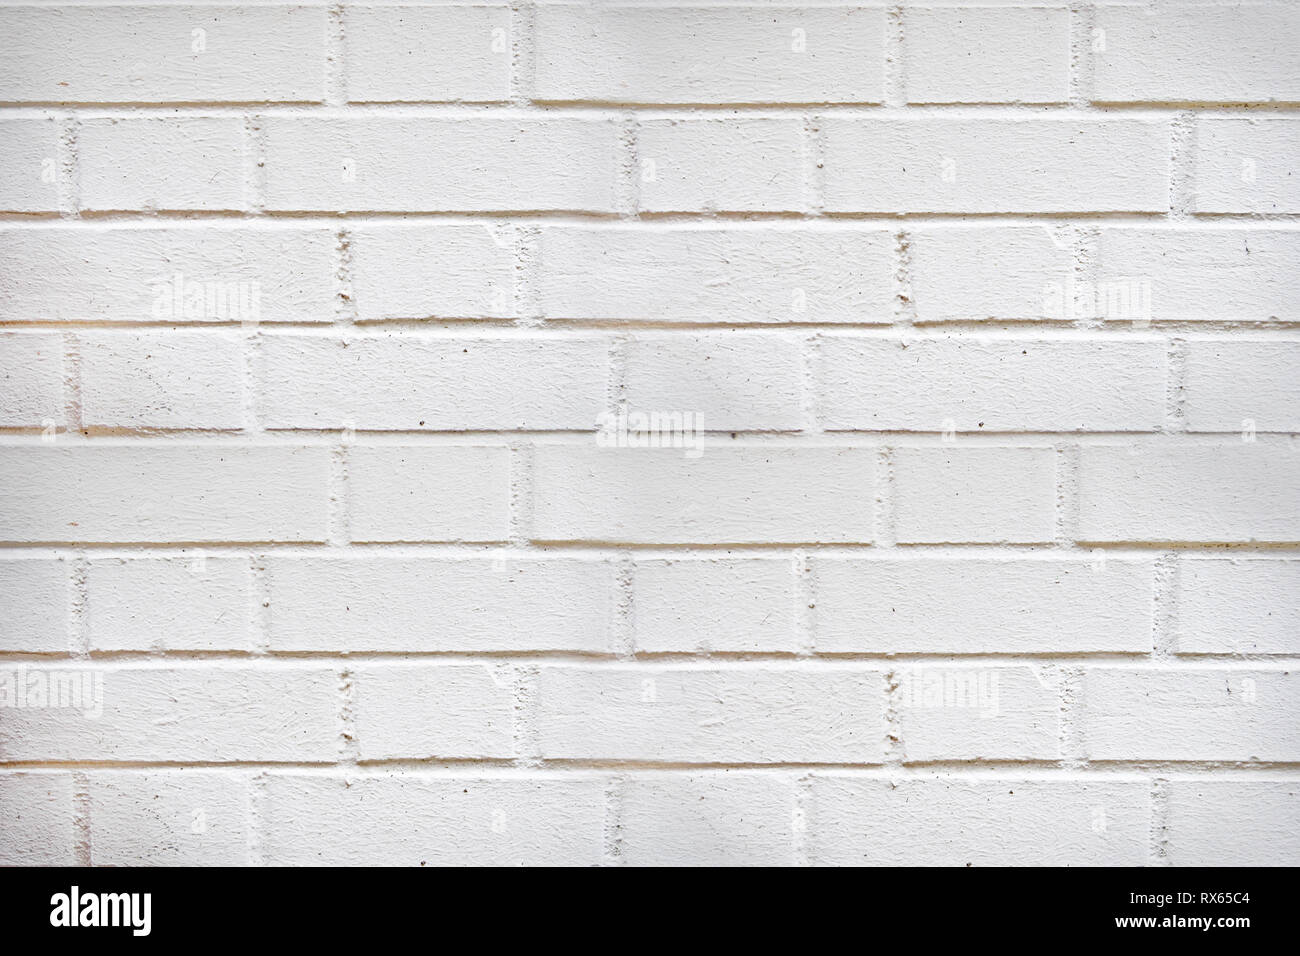 White brick wall background Banque D'Images